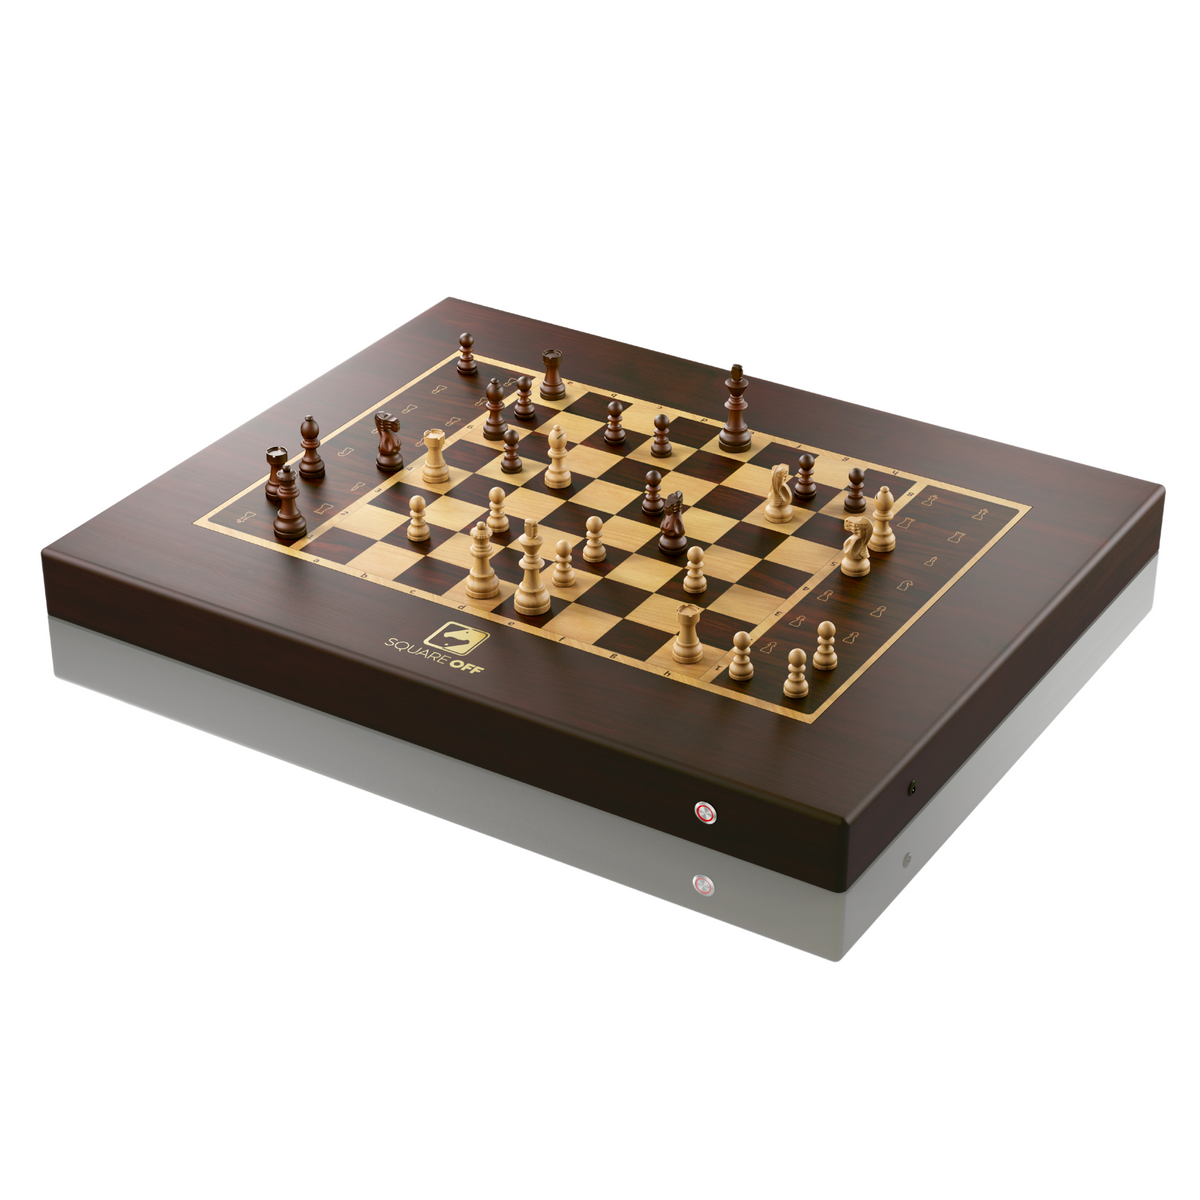 Makers Of The World's Smartest Chess Boards – Square Off at CES